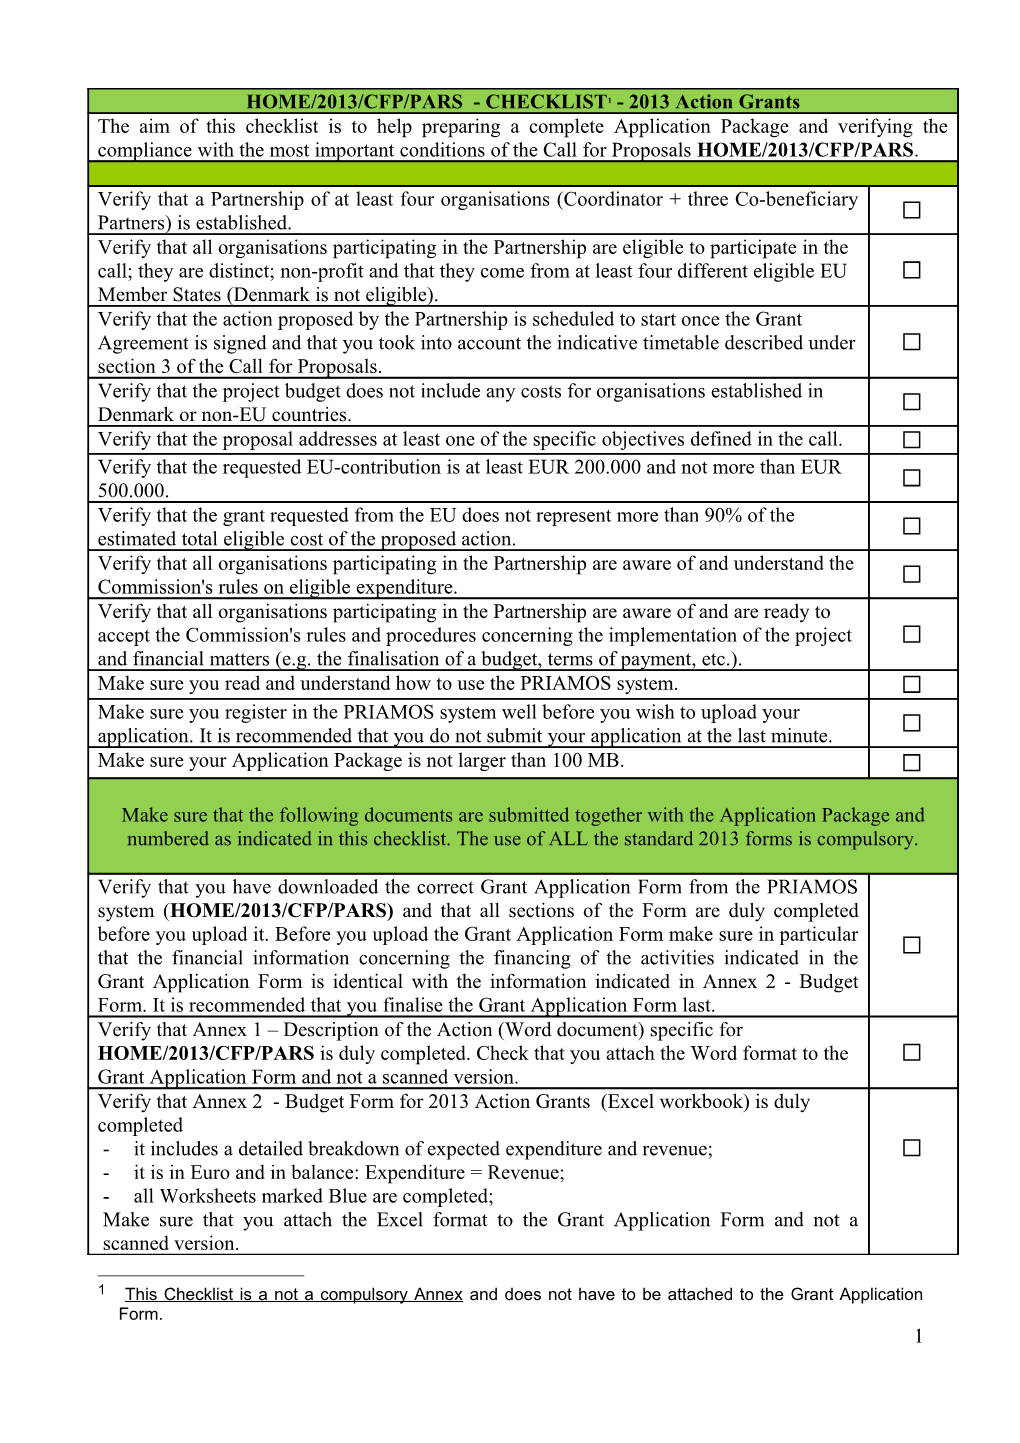 1 This Checklist Is a Not a Compulsory Annex and Does Not Have to Be Attached to the Grant